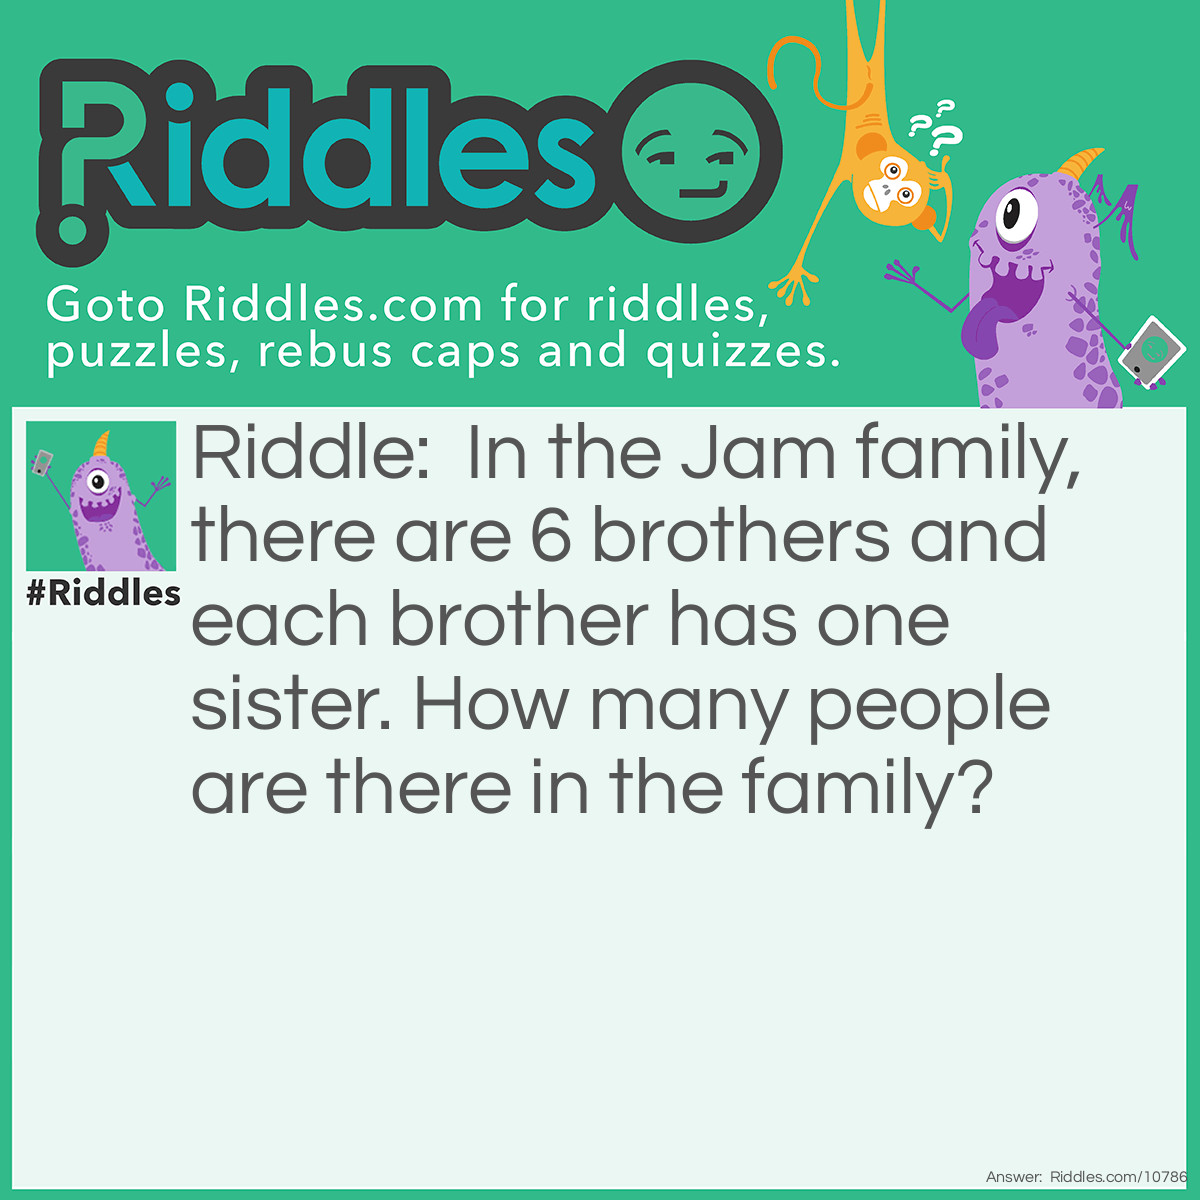 Riddle: In the Jam family, there are 6 brothers and each brother has one sister. How many people are there in the family? Answer: 9. Each brother has the same sister and they are in the same family which makes it 7 plus the parents which make 9.